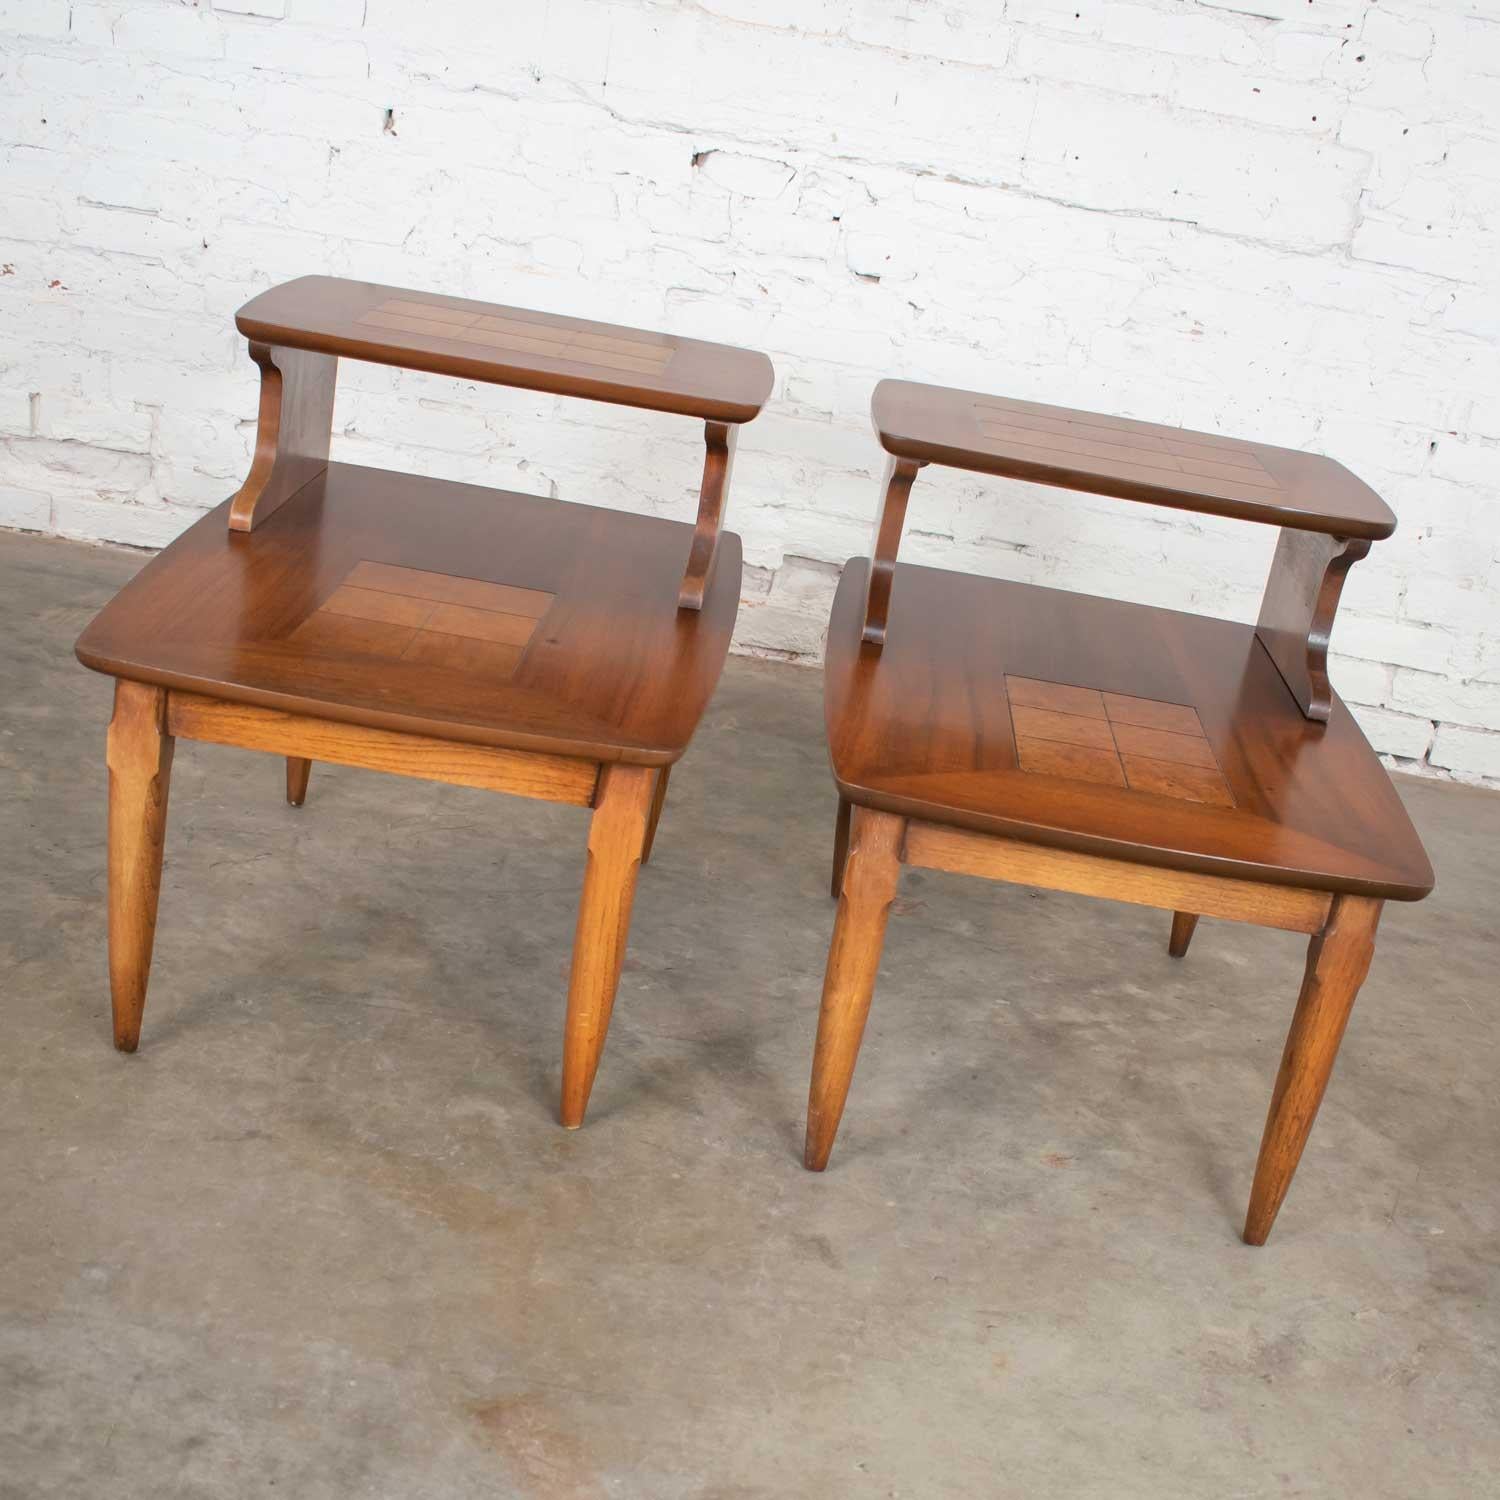 Amazing Mid-Century Modern pair of Lane Alta Vista step table end tables style #1927 walnut with inlaid walnut burl squares in their centers. They are in wonderful condition. The tops have been refinished with a new coat of polyurethane applied. The